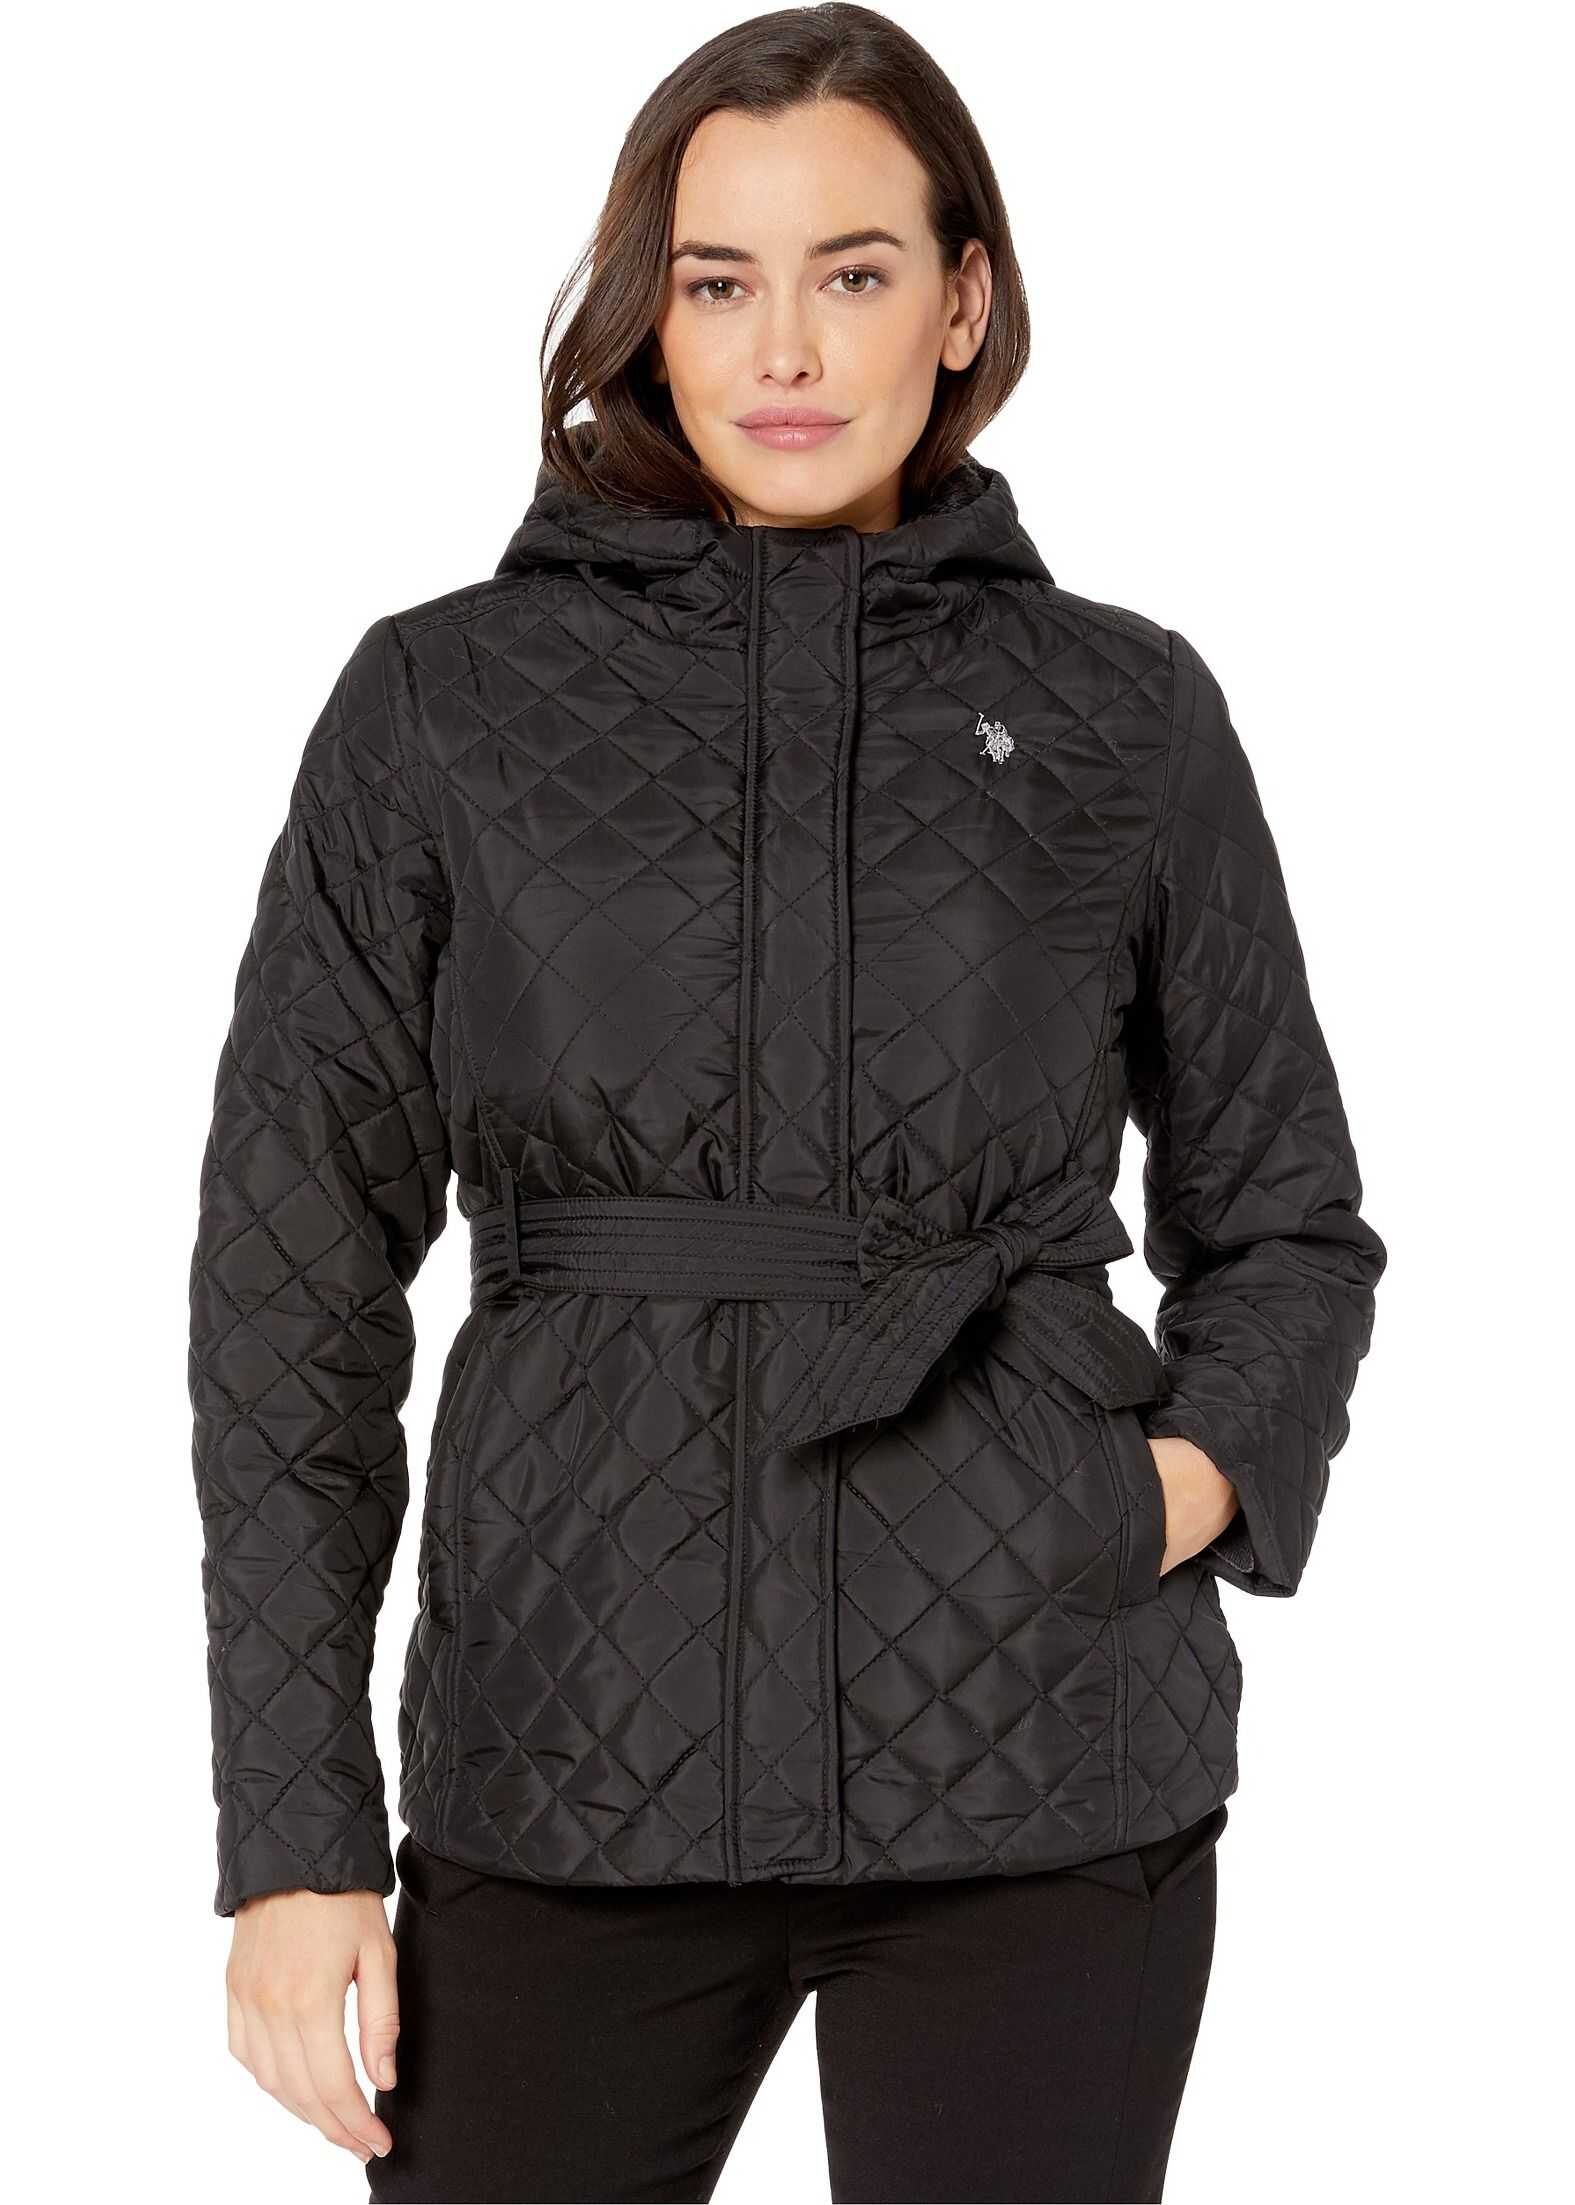 U.S. POLO ASSN. Belted Quilt Lined Jacket with Sherpa Black